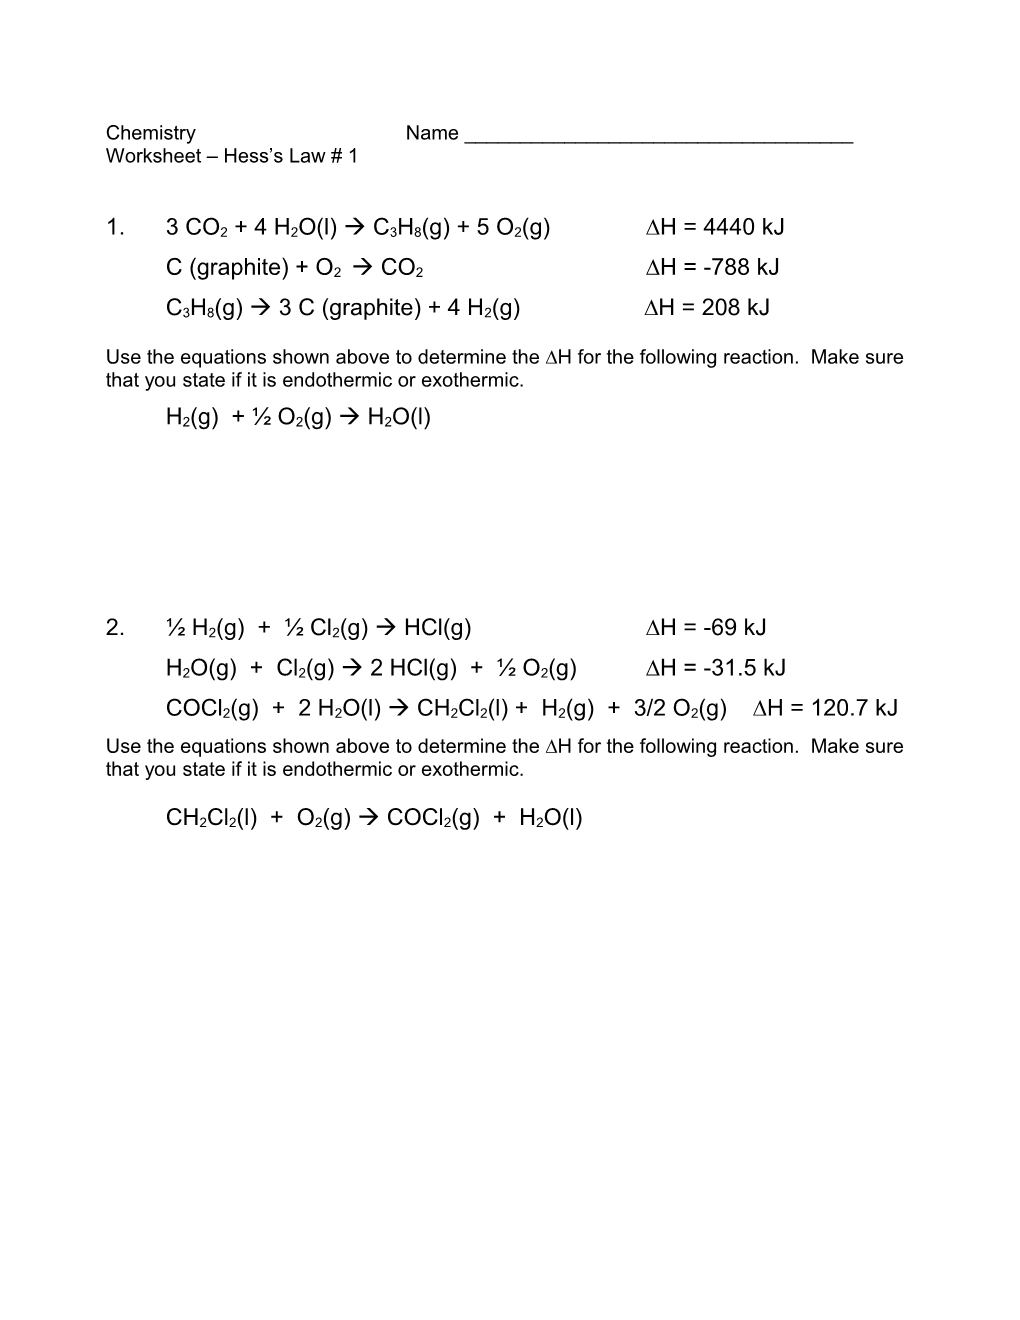 Use the Thermochemical Equations Shown Below to Determine